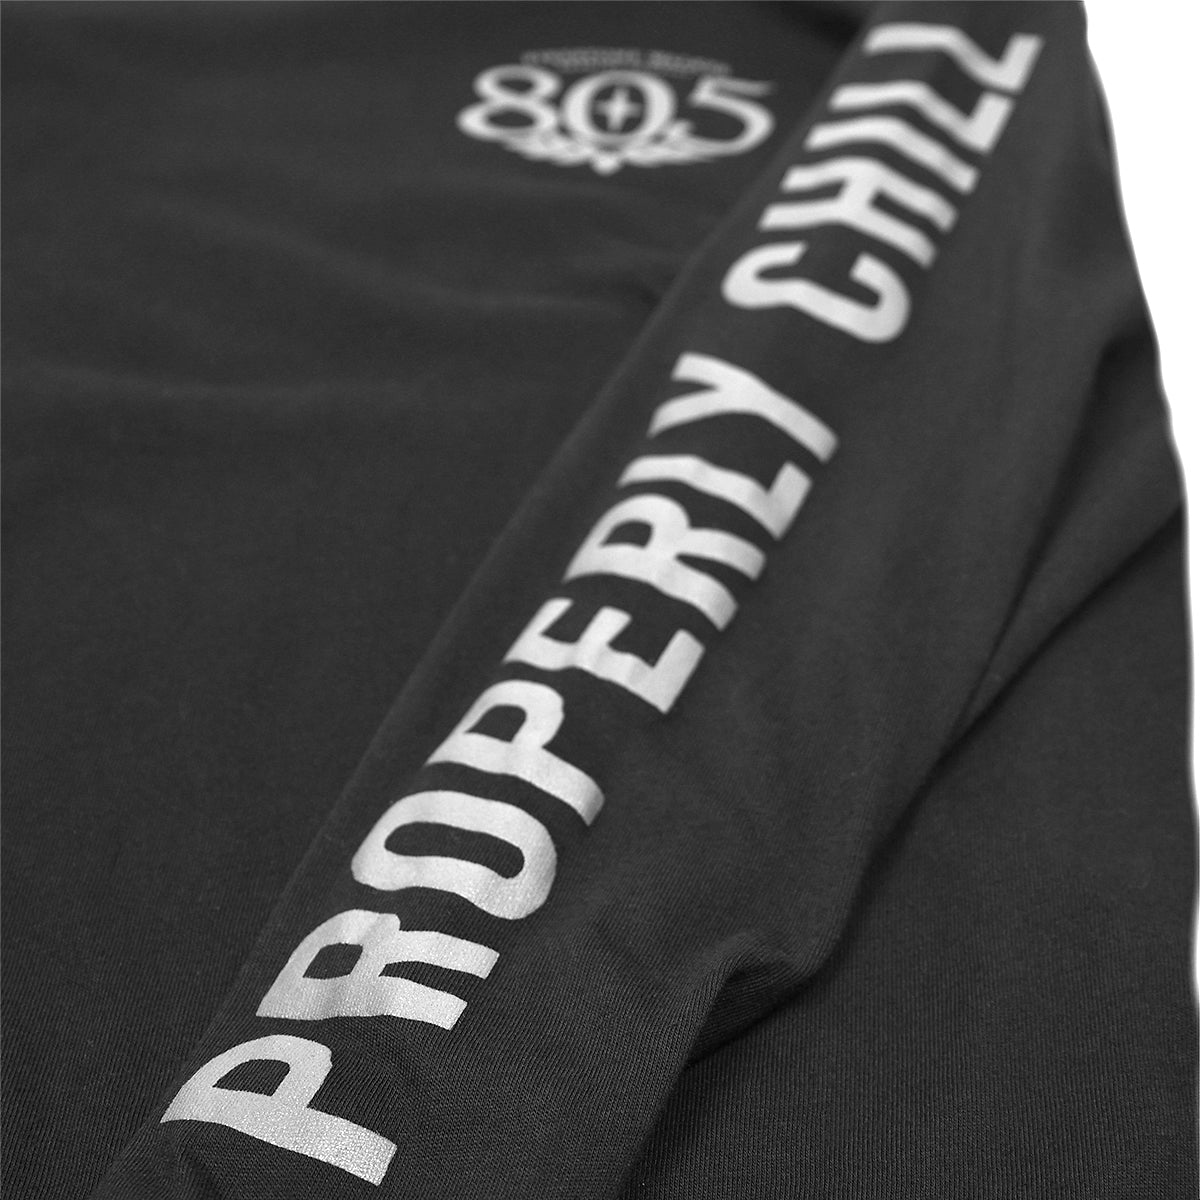 805 Premier Properly Chill Long Sleeve Tee